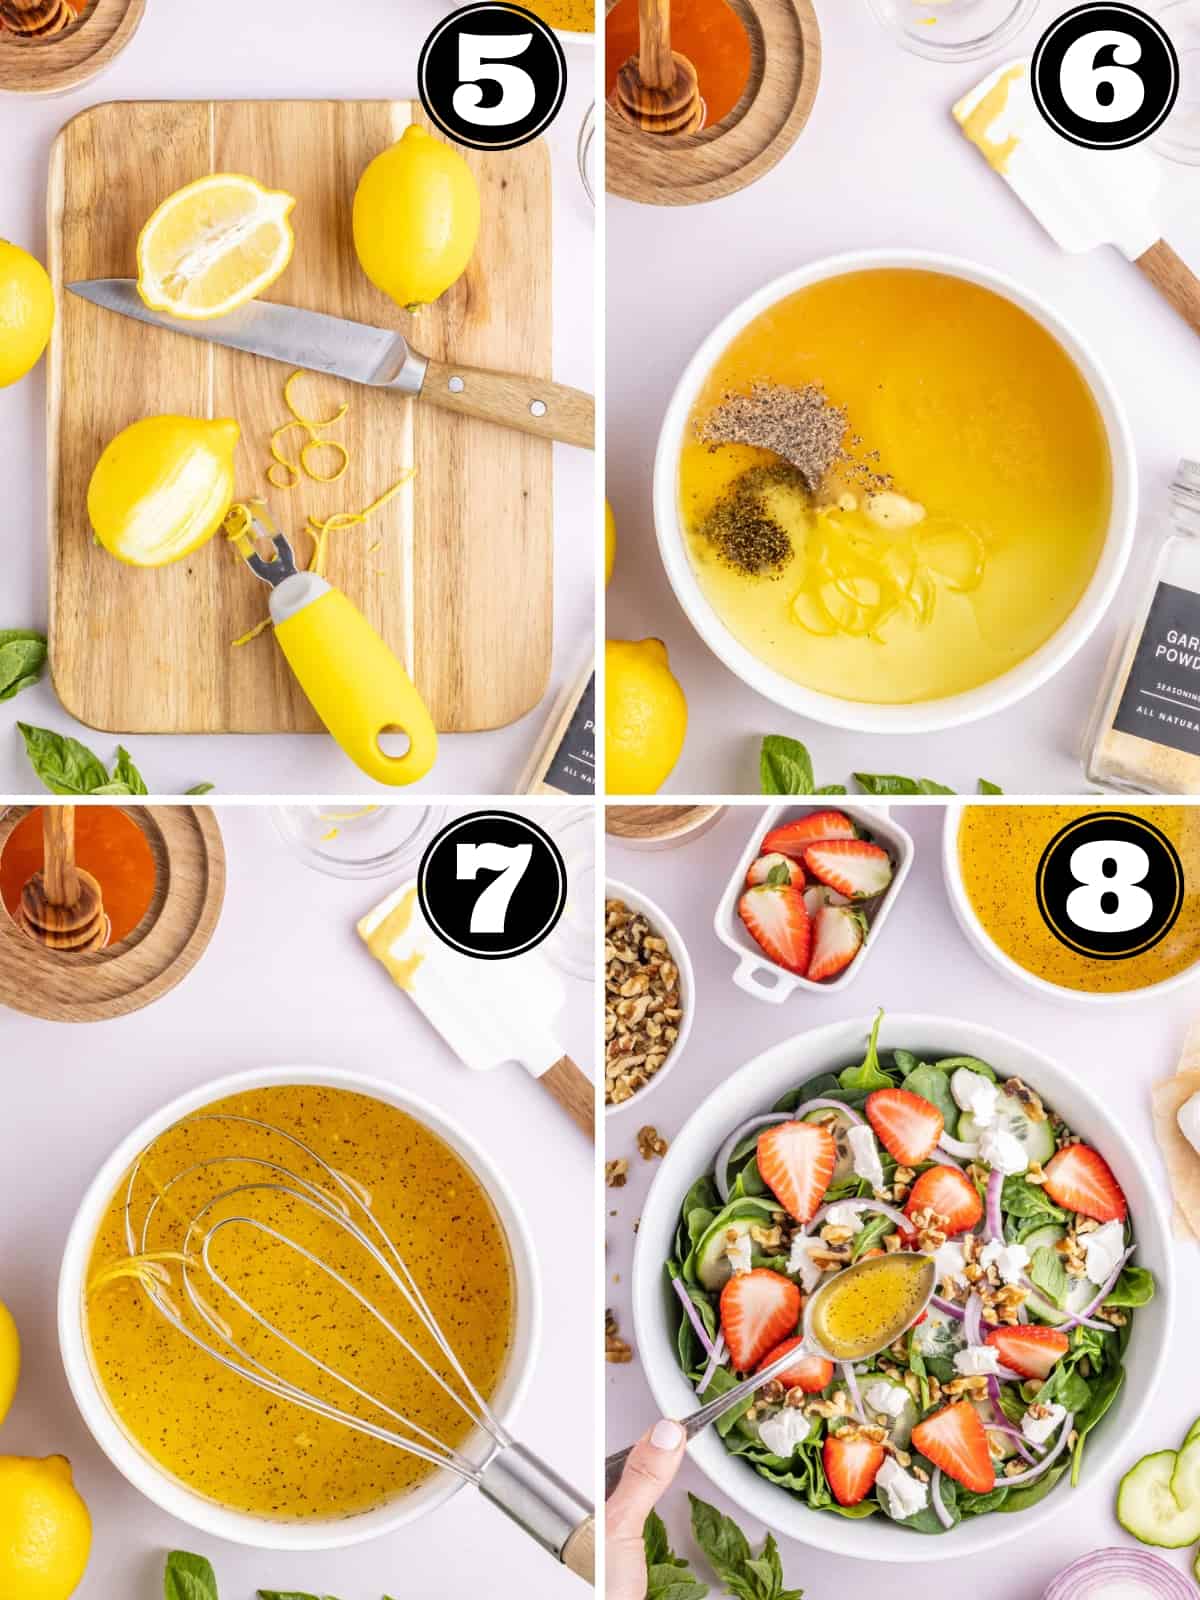 A collage of images showing how to make lemon vinaigrette and dressing the salad.